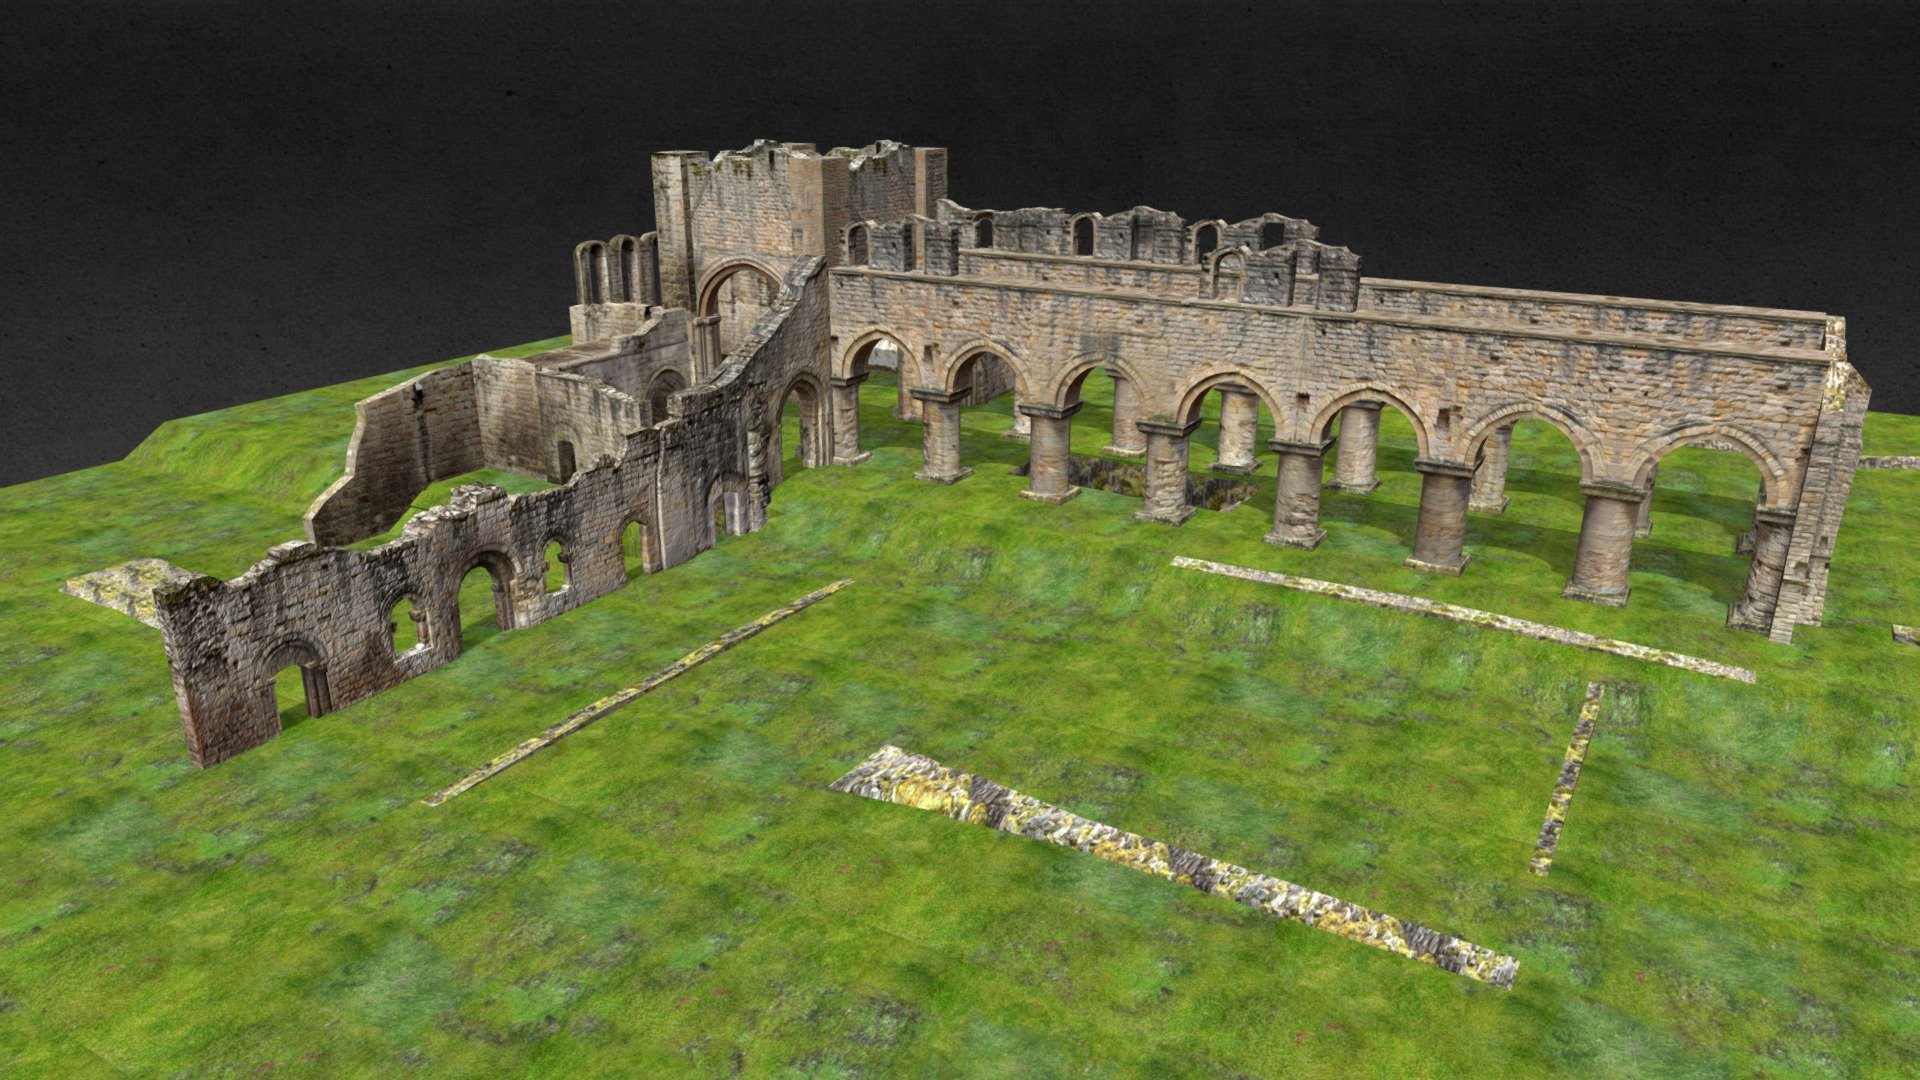 What was once a thriving monastery has fallen into disrepair. The monks have long gone and all that`s left are these ruins. Are they haunted, cursed, or are they still holy land?

Product Features:




Approx 21,553 polygons.

Made entirely with 3 and 4 point polygons.

Includes group information, which your software should interpret as separate parts for the base, walls, and stairs.

The model is not rigged.

The model is UV mapped.

Textures and corresponding normal/ bump maps (in jpg format) are included, at 4096x4096 pixels.

Original model by Arteria3D, converted and uploaded here with permission 3d model